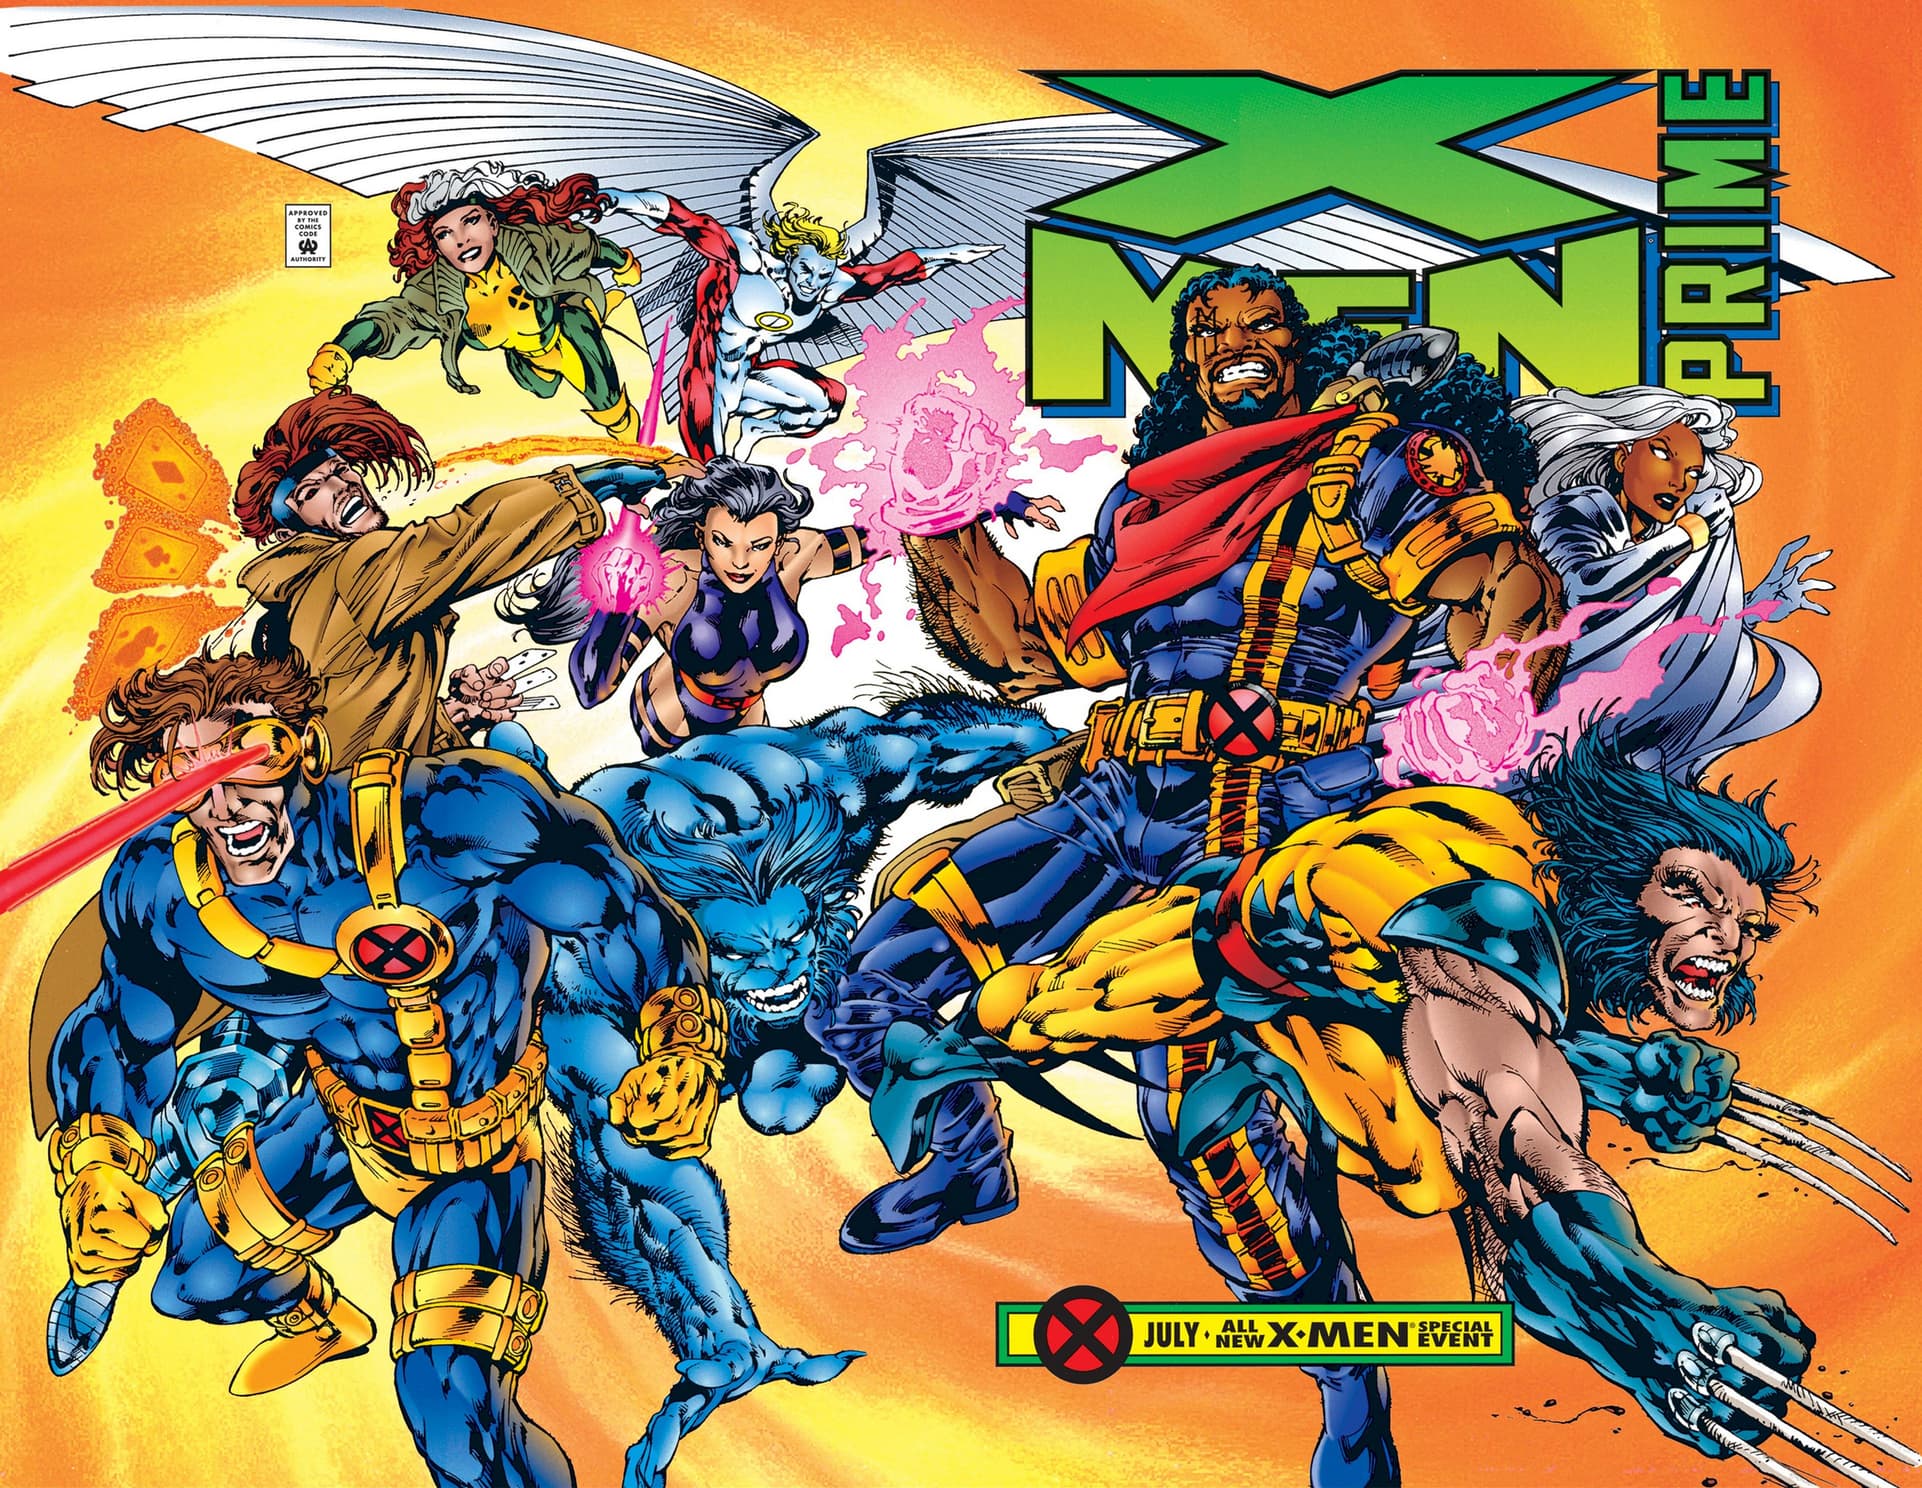 X-MEN PRIME (1995) #1 cover by Bryan Hitch